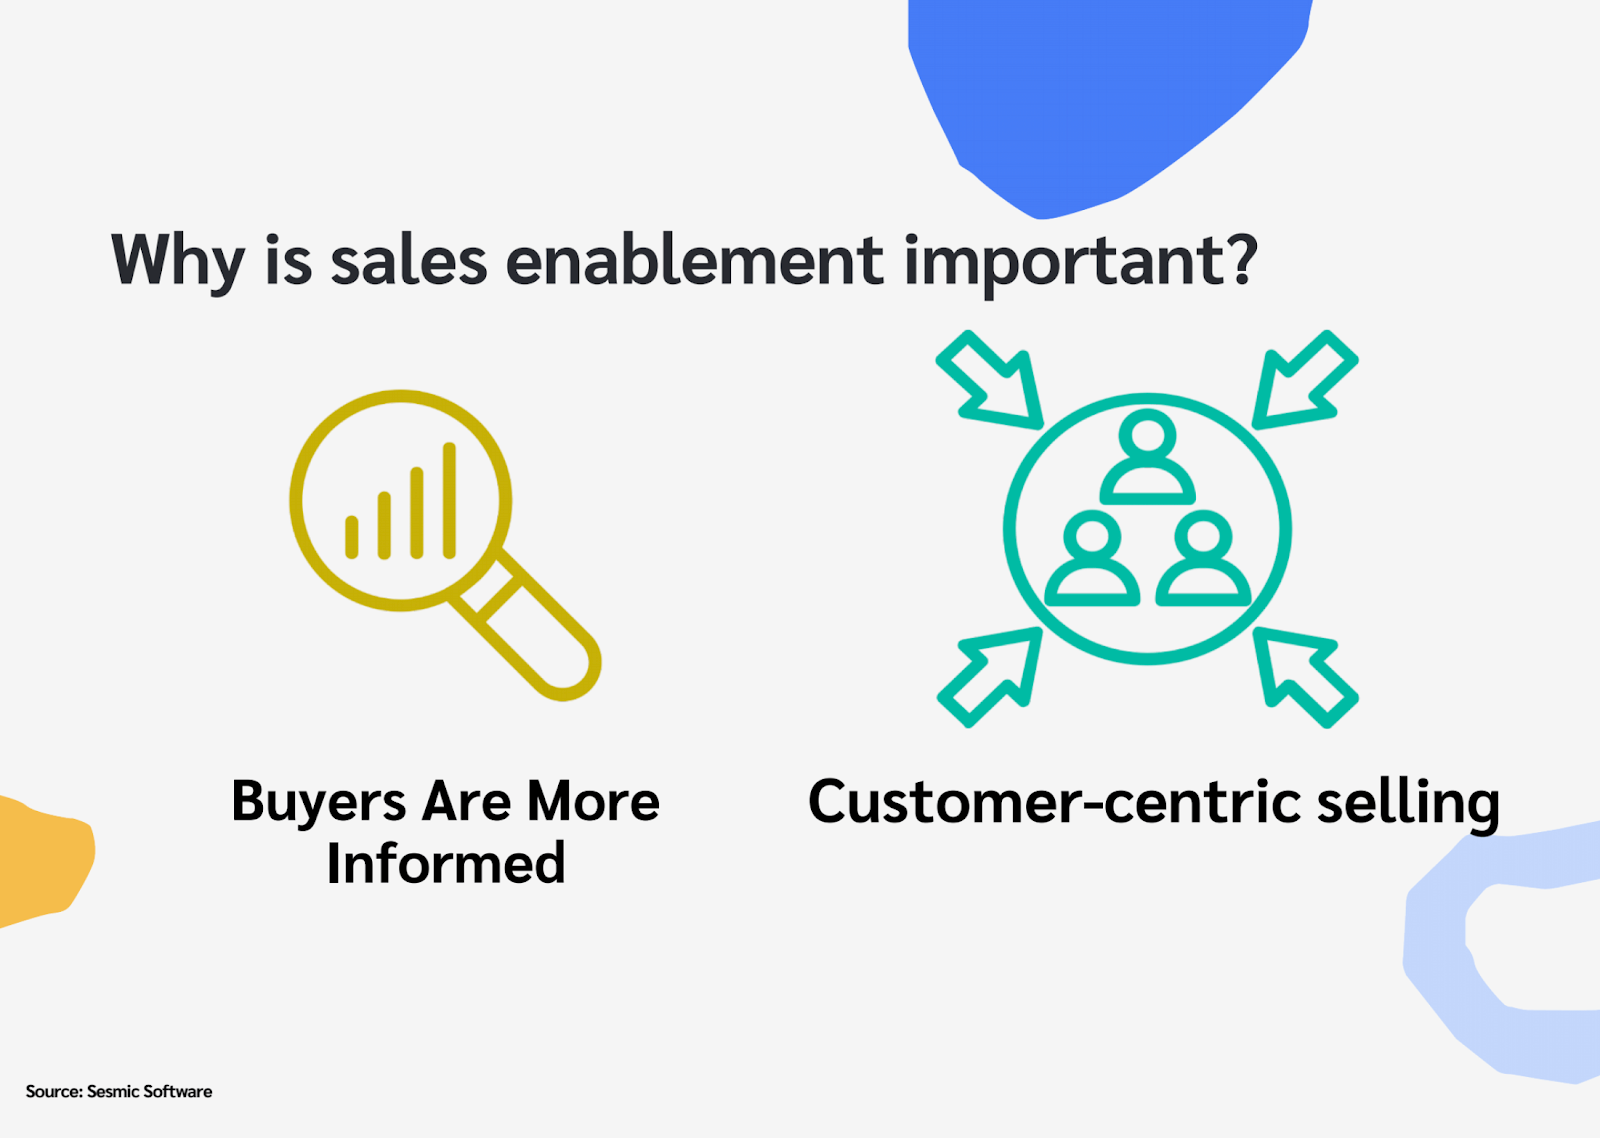 Sales enablement facilitates customer-centric selling and keeps buyers informed.